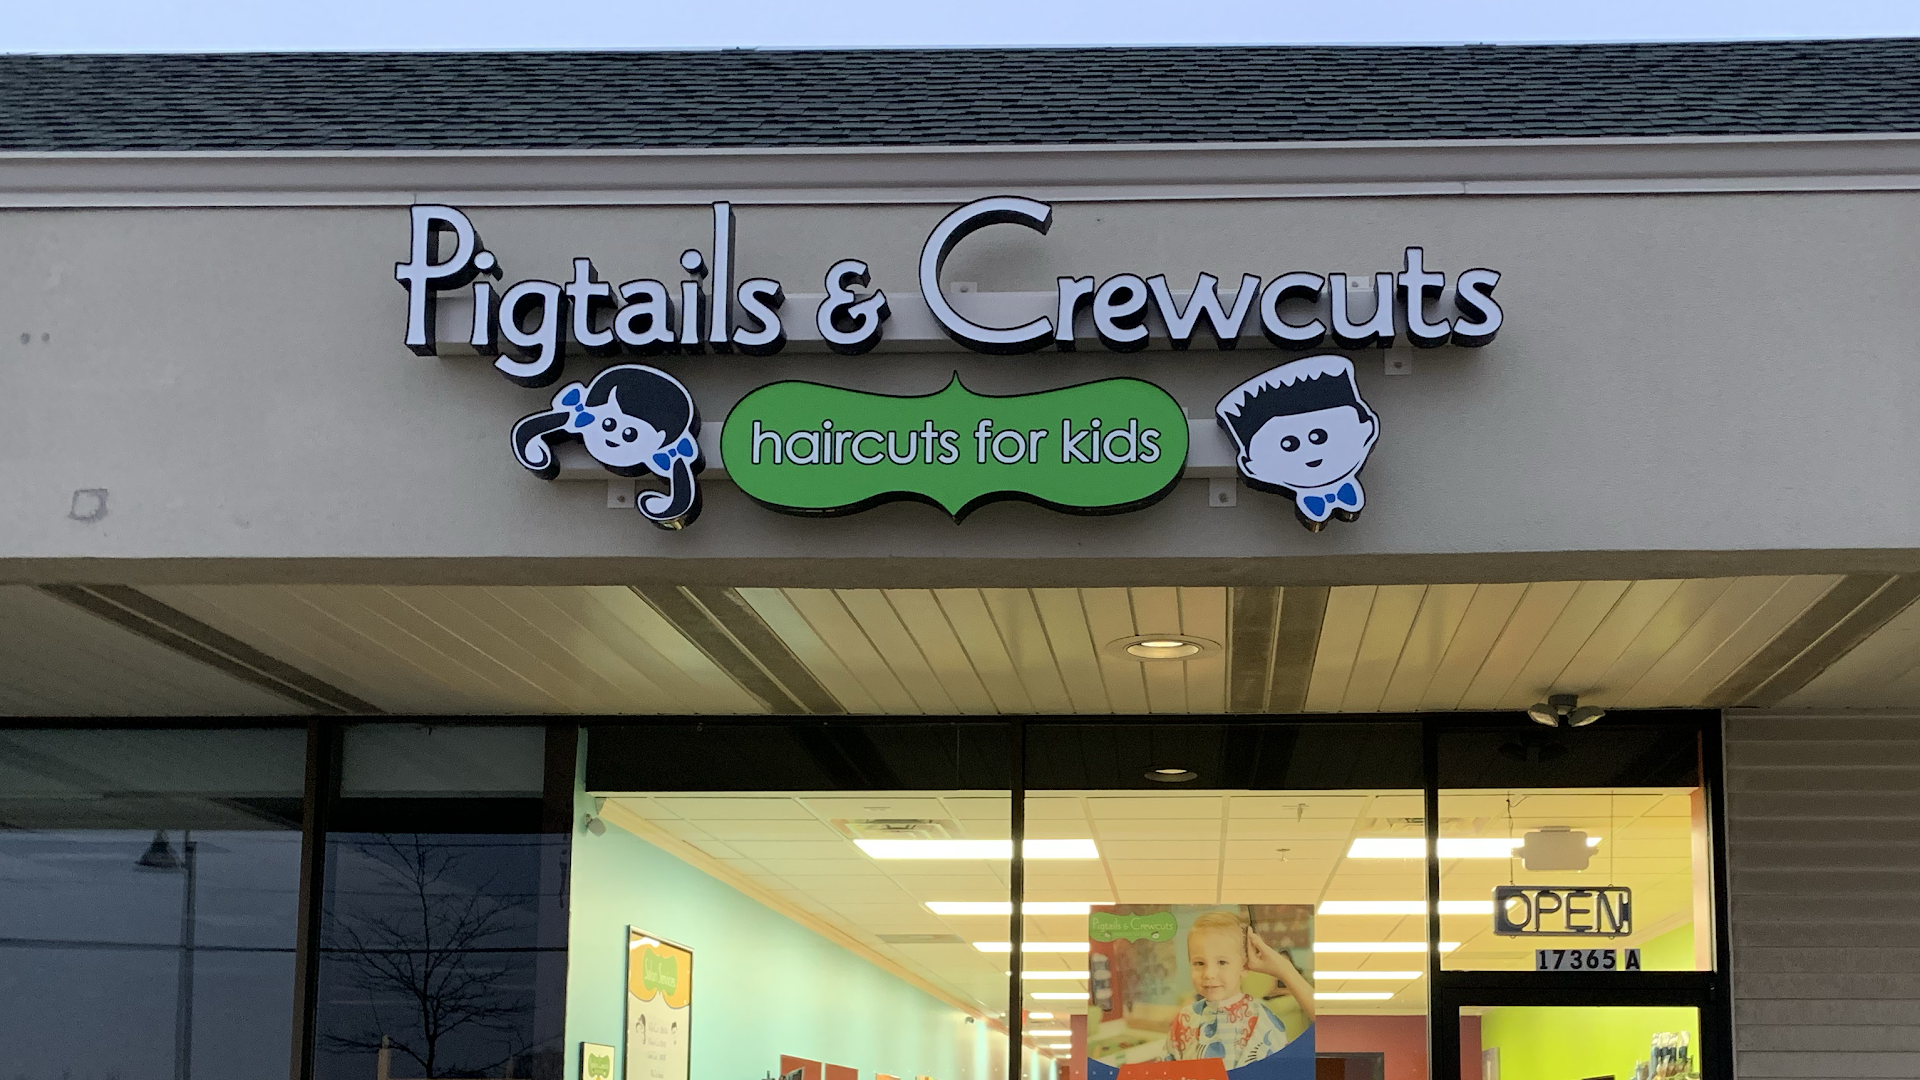 Pigtails & Crewcuts: Haircuts for Kids - Brookfield, WI